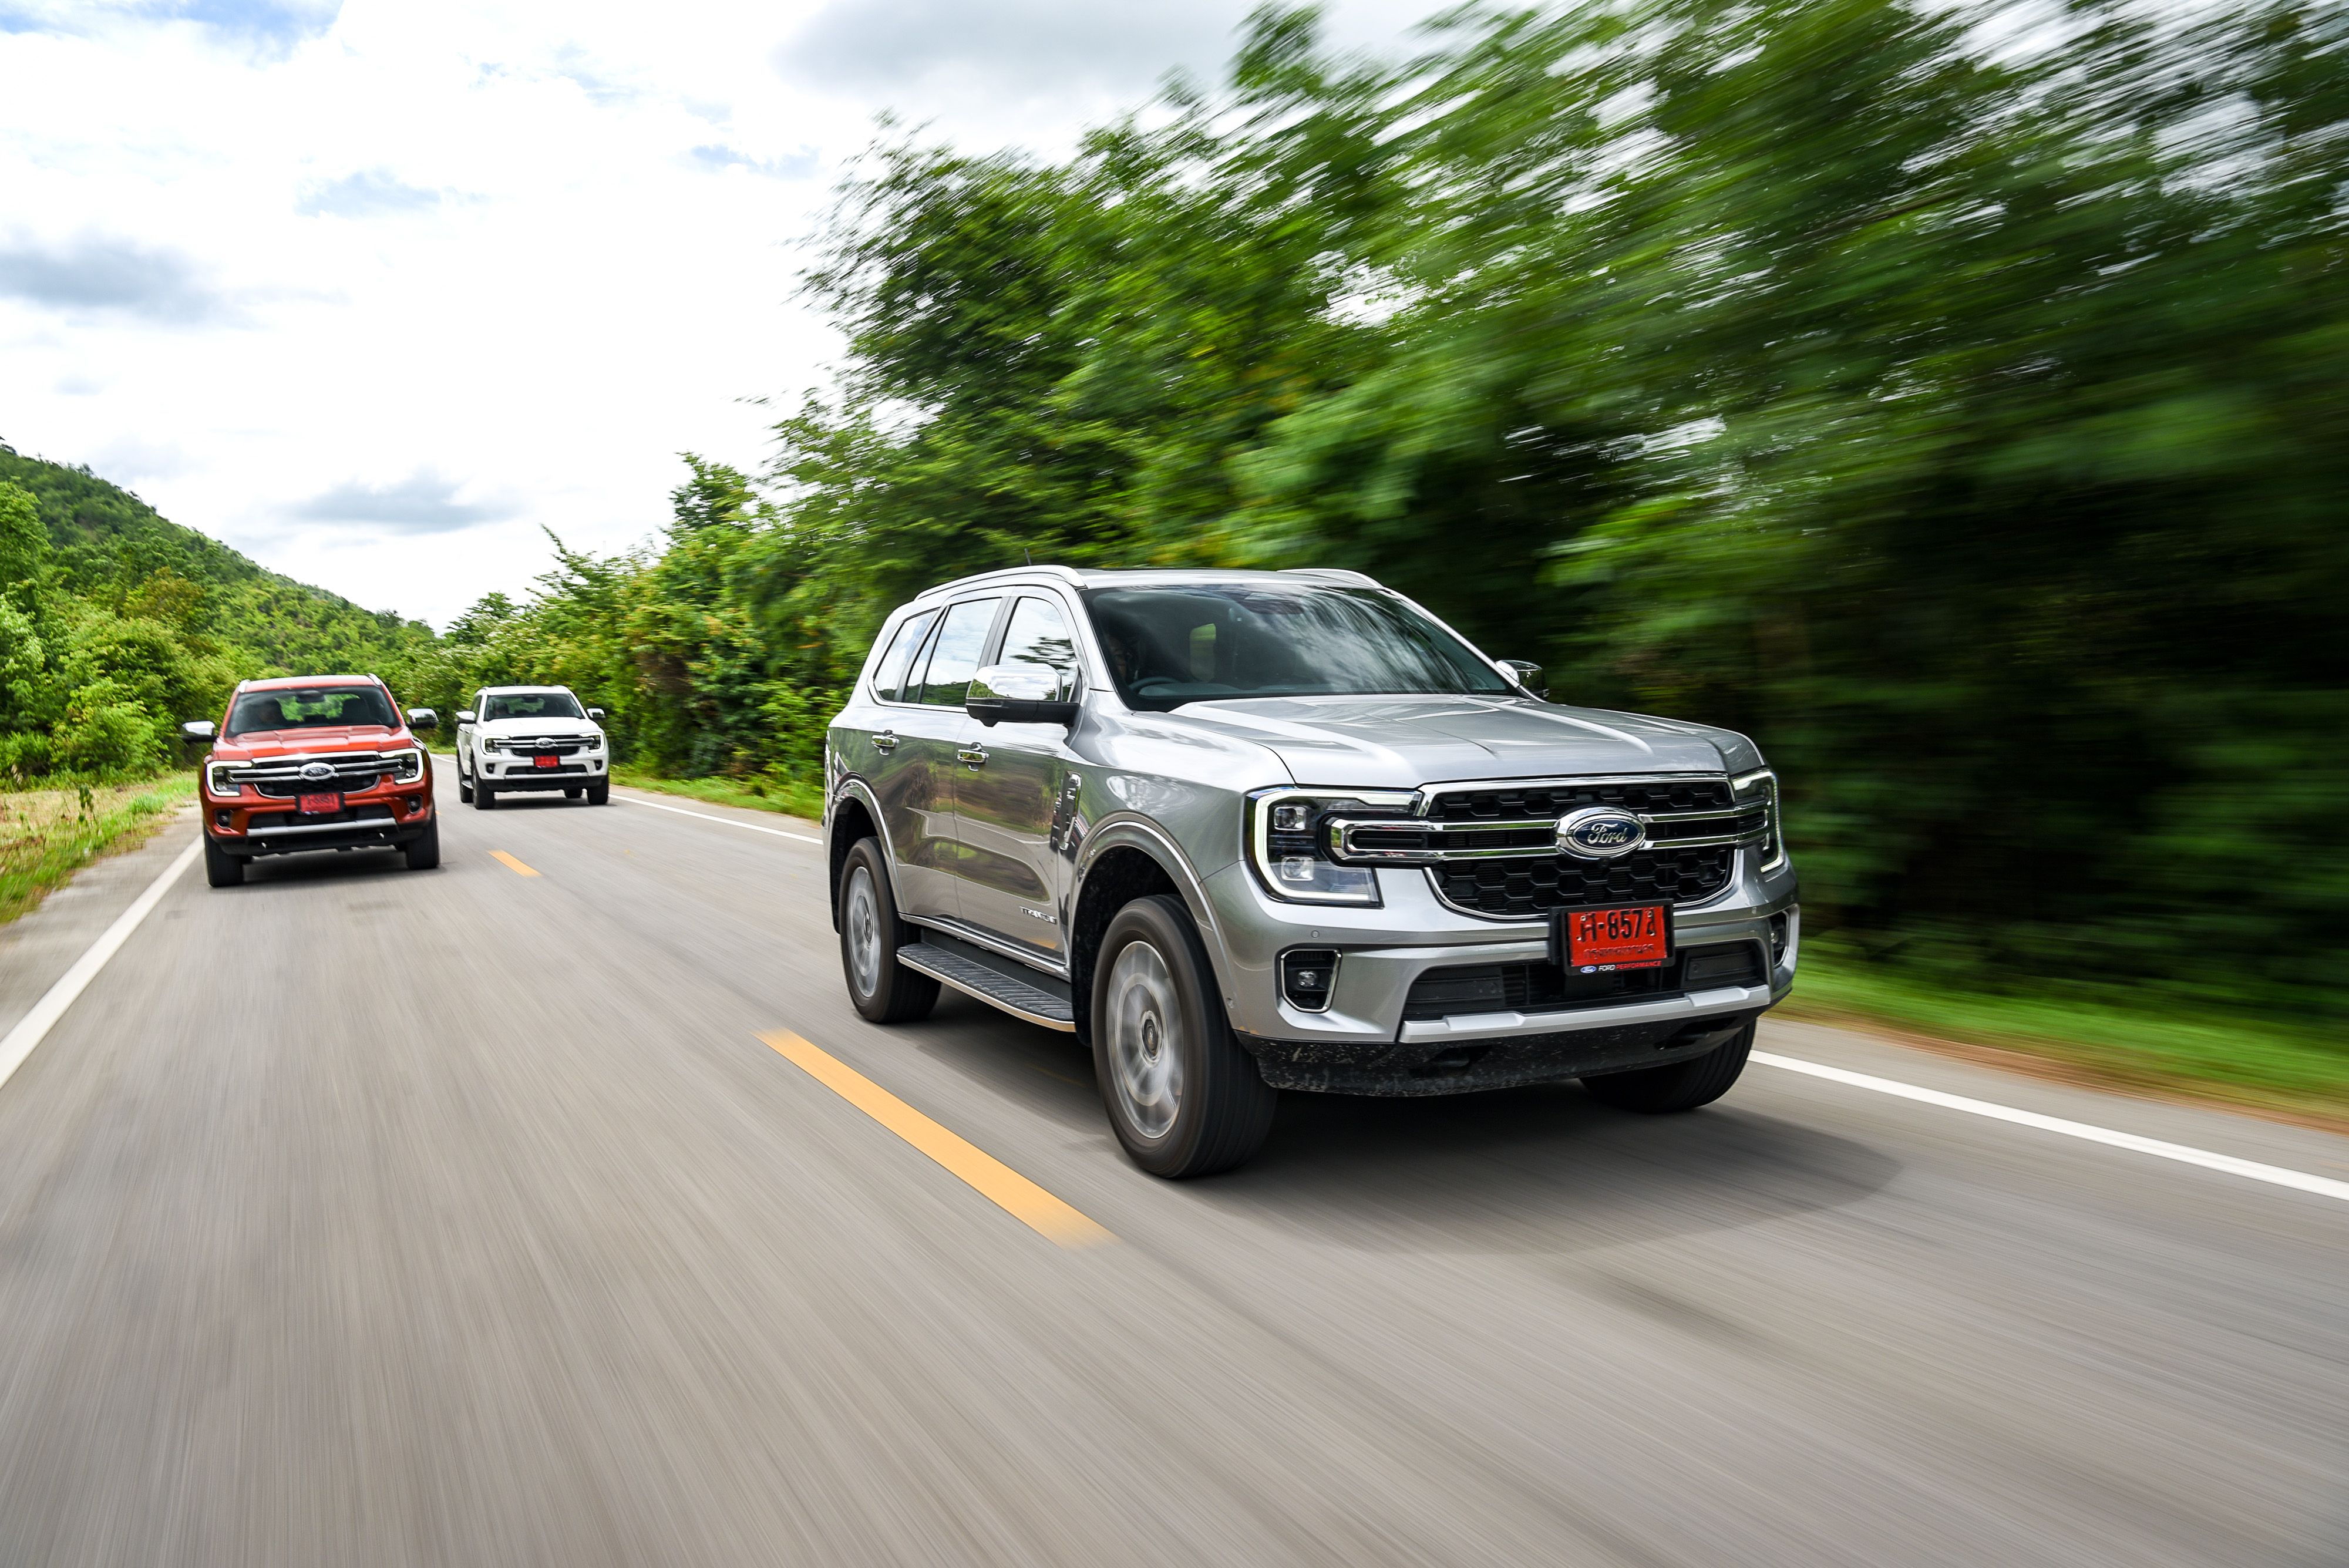 2022 2023 Ford Everest First Drive: What the Ford Explorer Used to Be